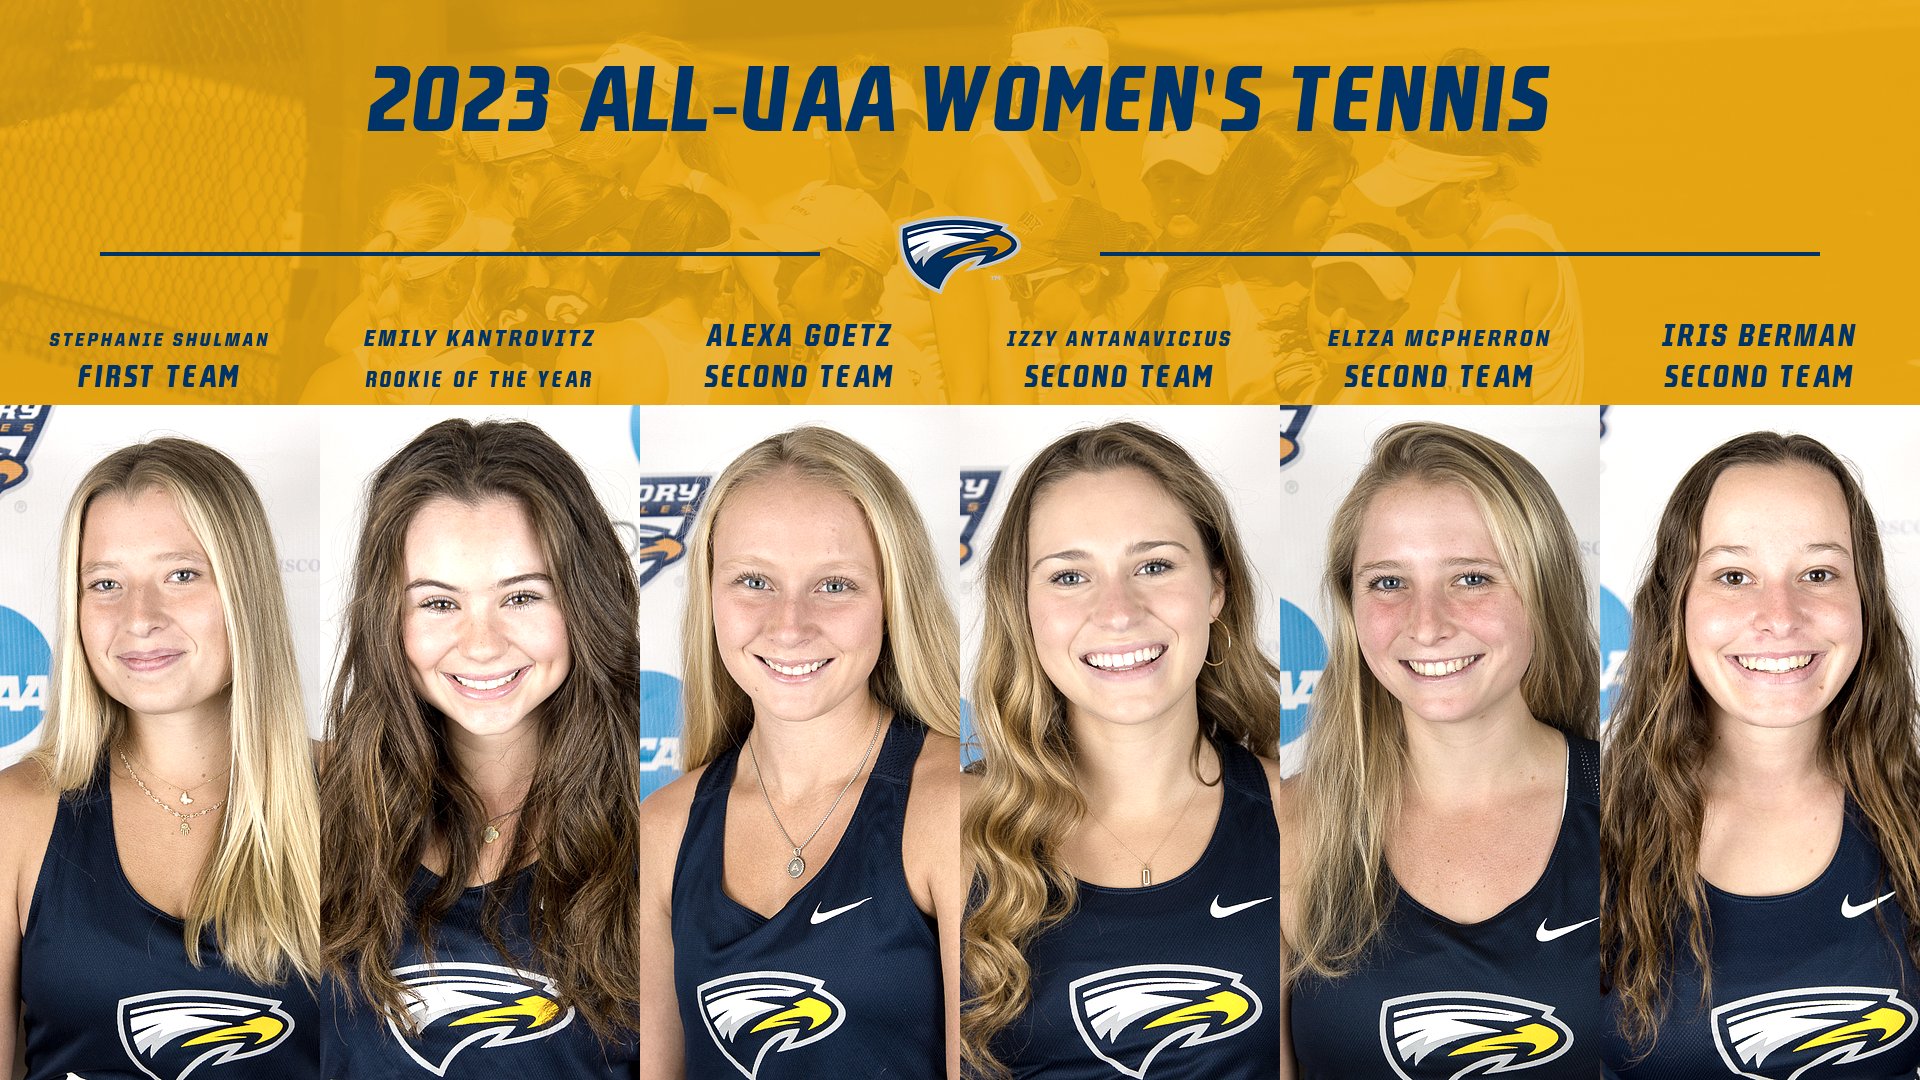 Six From Women's Tennis Recognized on All-UAA Team; Kantrovitz Tabbed as Rookie of the Year